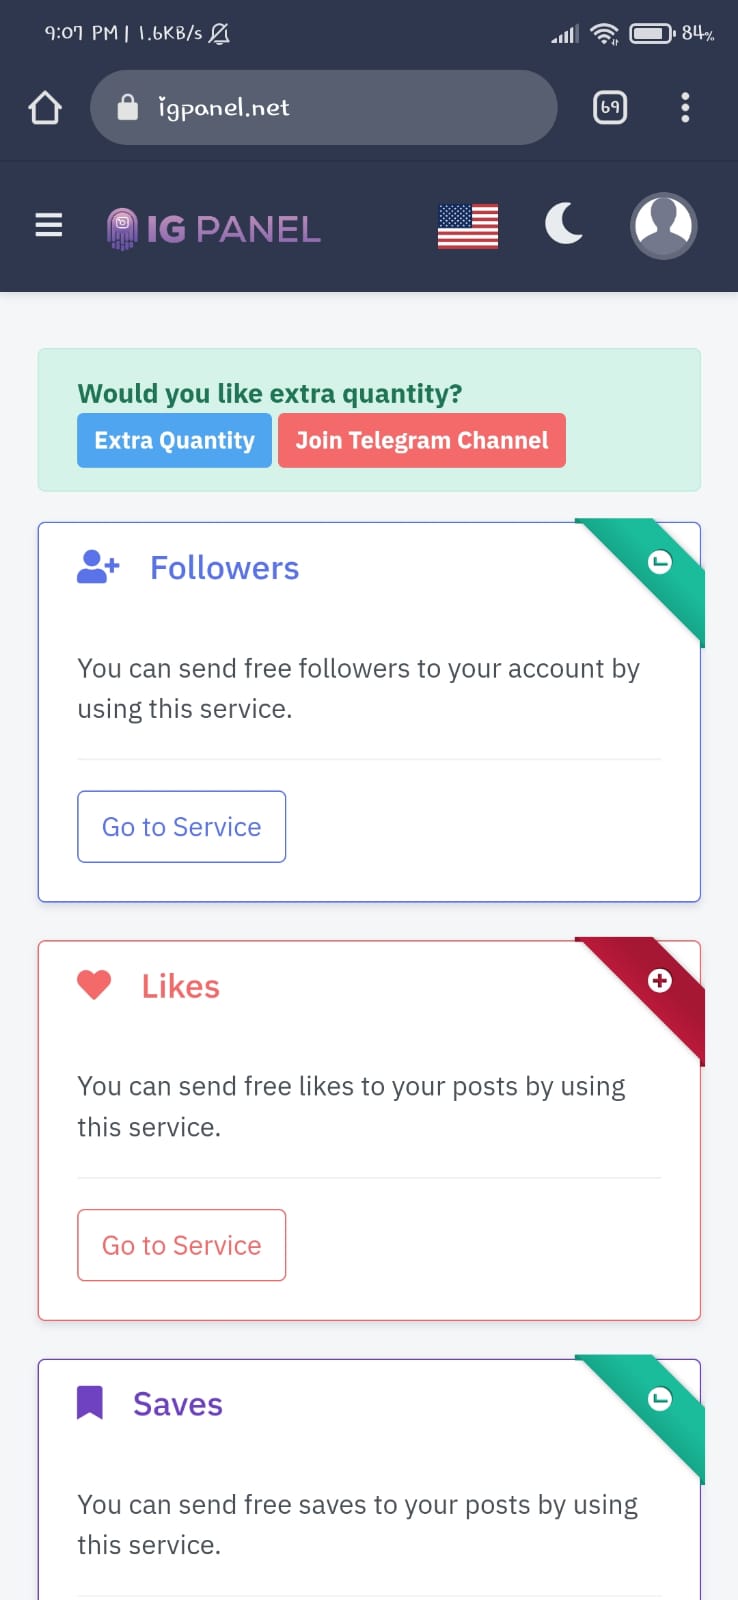 IG Panel APK (Unlimited, Real, Free Likes, Followers & Views)